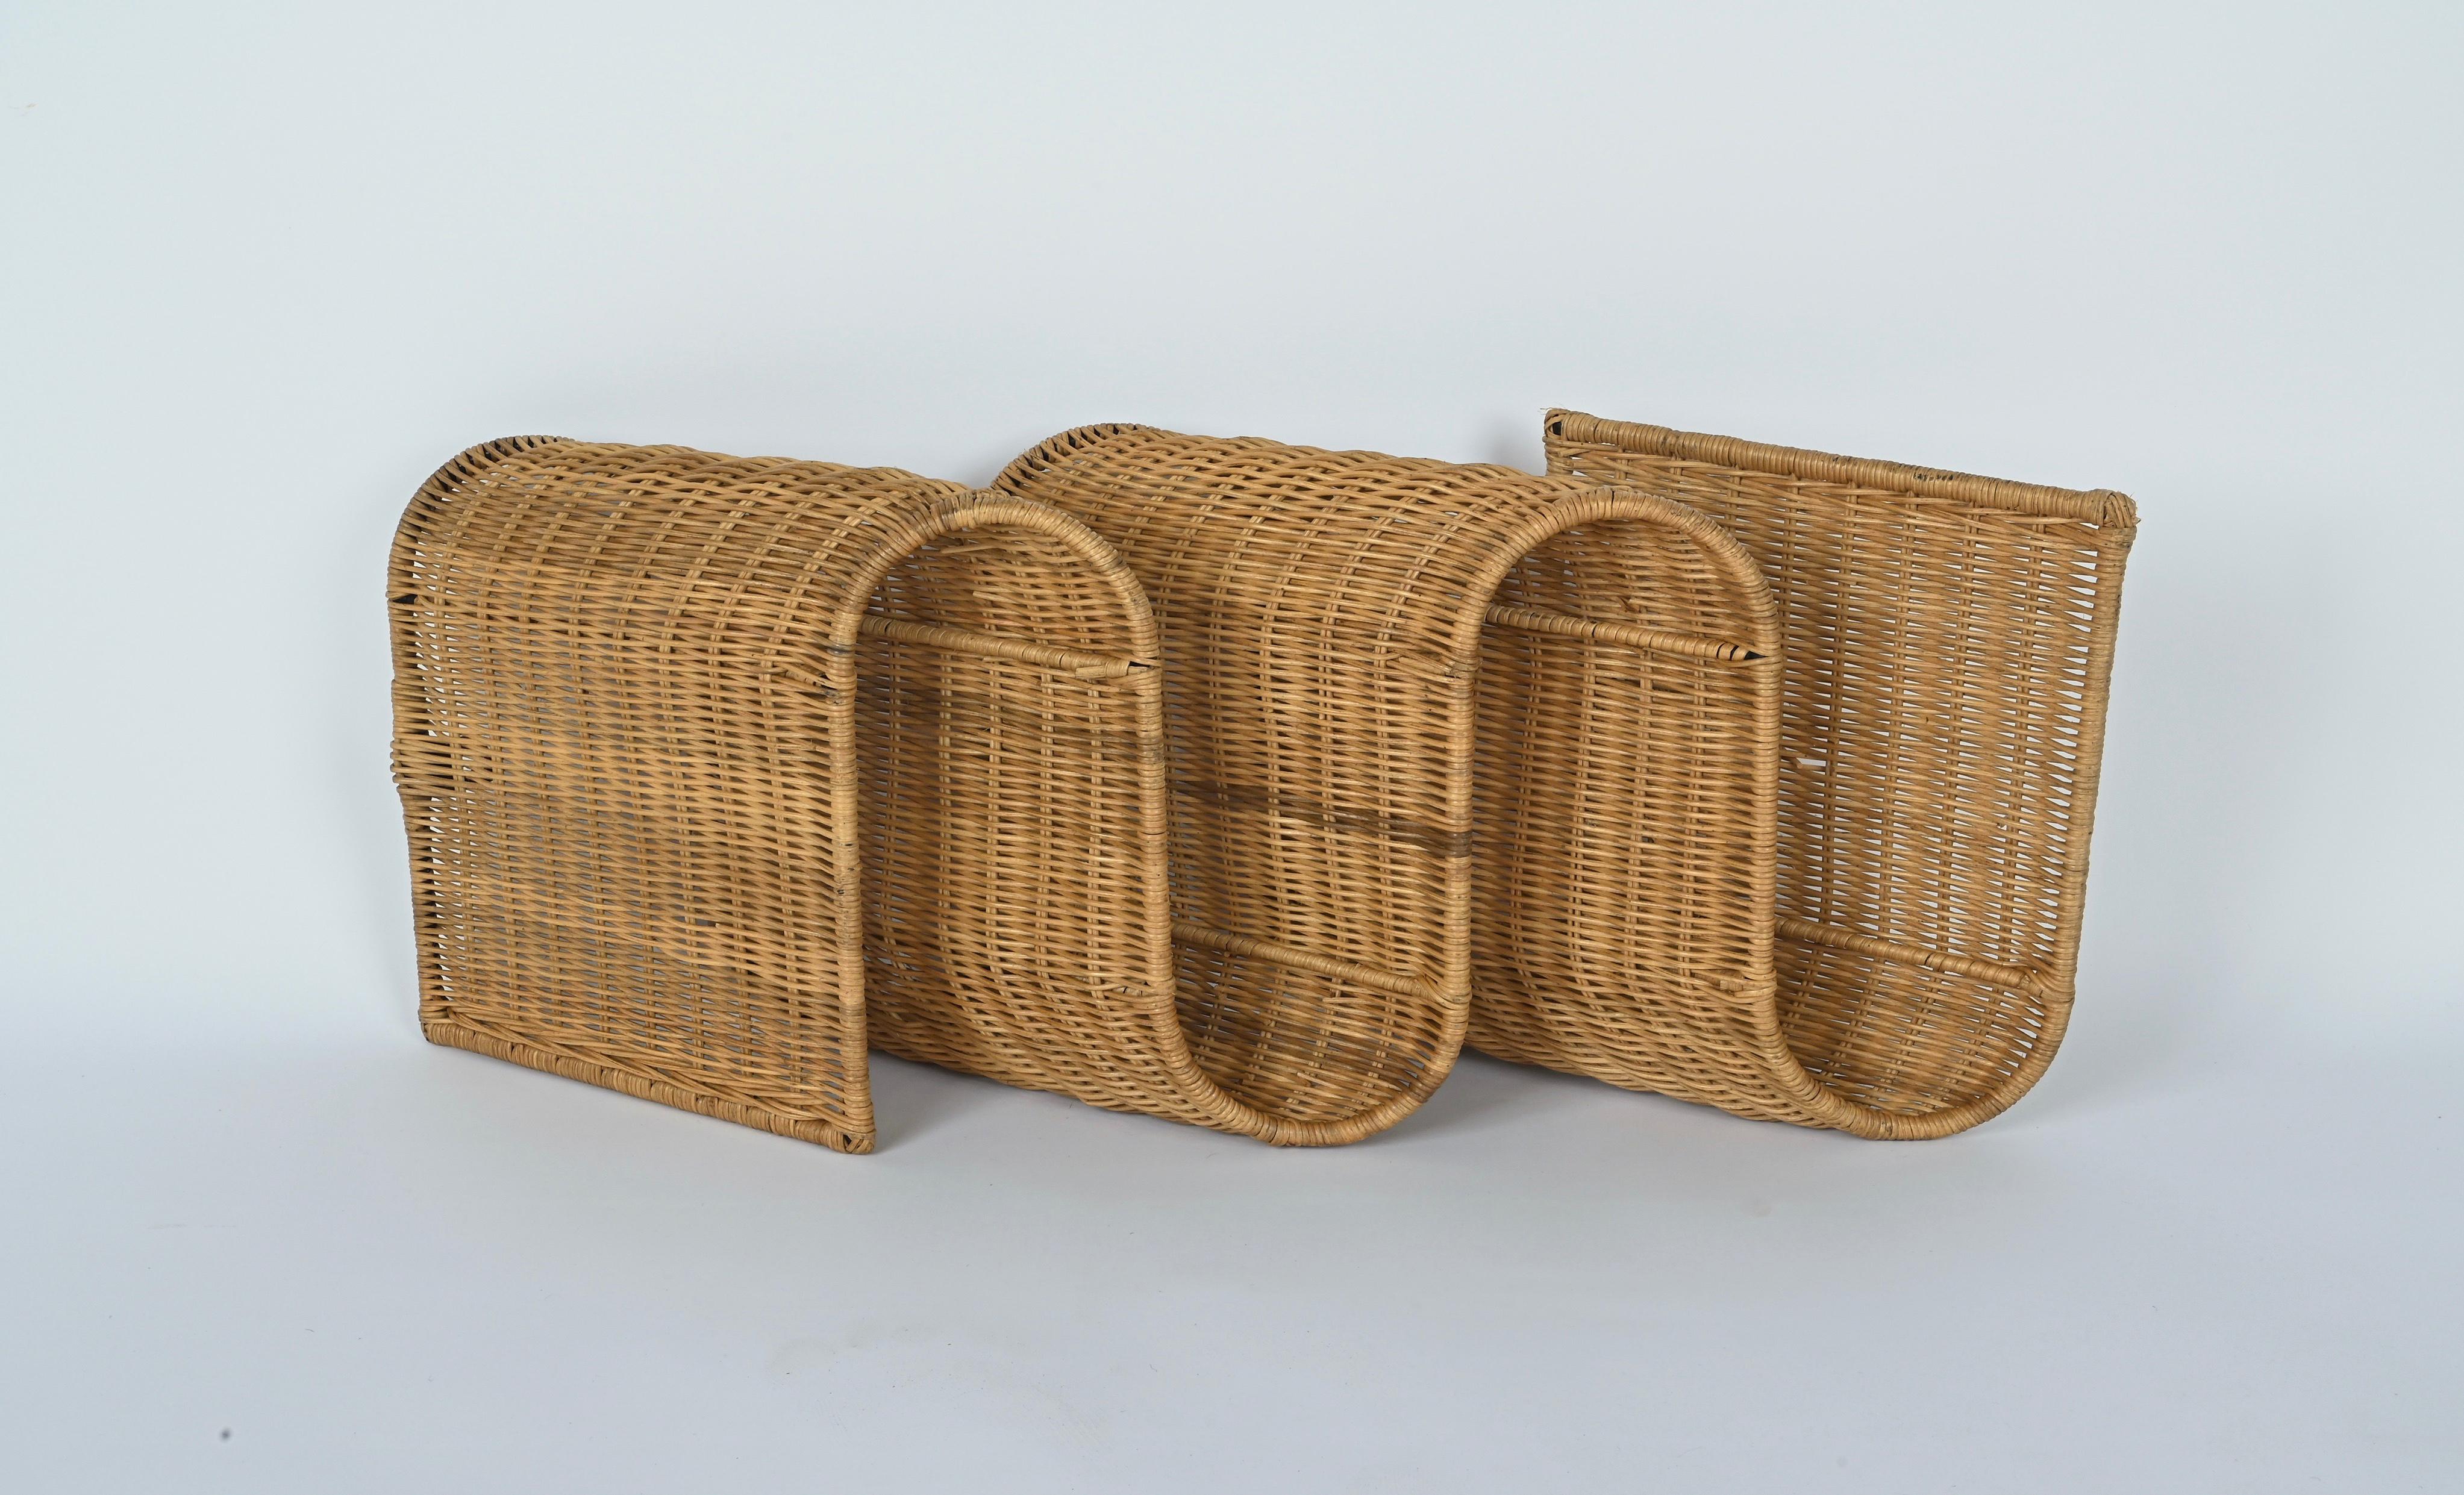 Wonderful midcentury rattan sinusoidal magazine rack. This stunning piece was designed in Italy between the 1960s and 1970s.

The most exciting feature is its stunning snake shape and has to be wall-mounted.

A magnificent magazine rack that